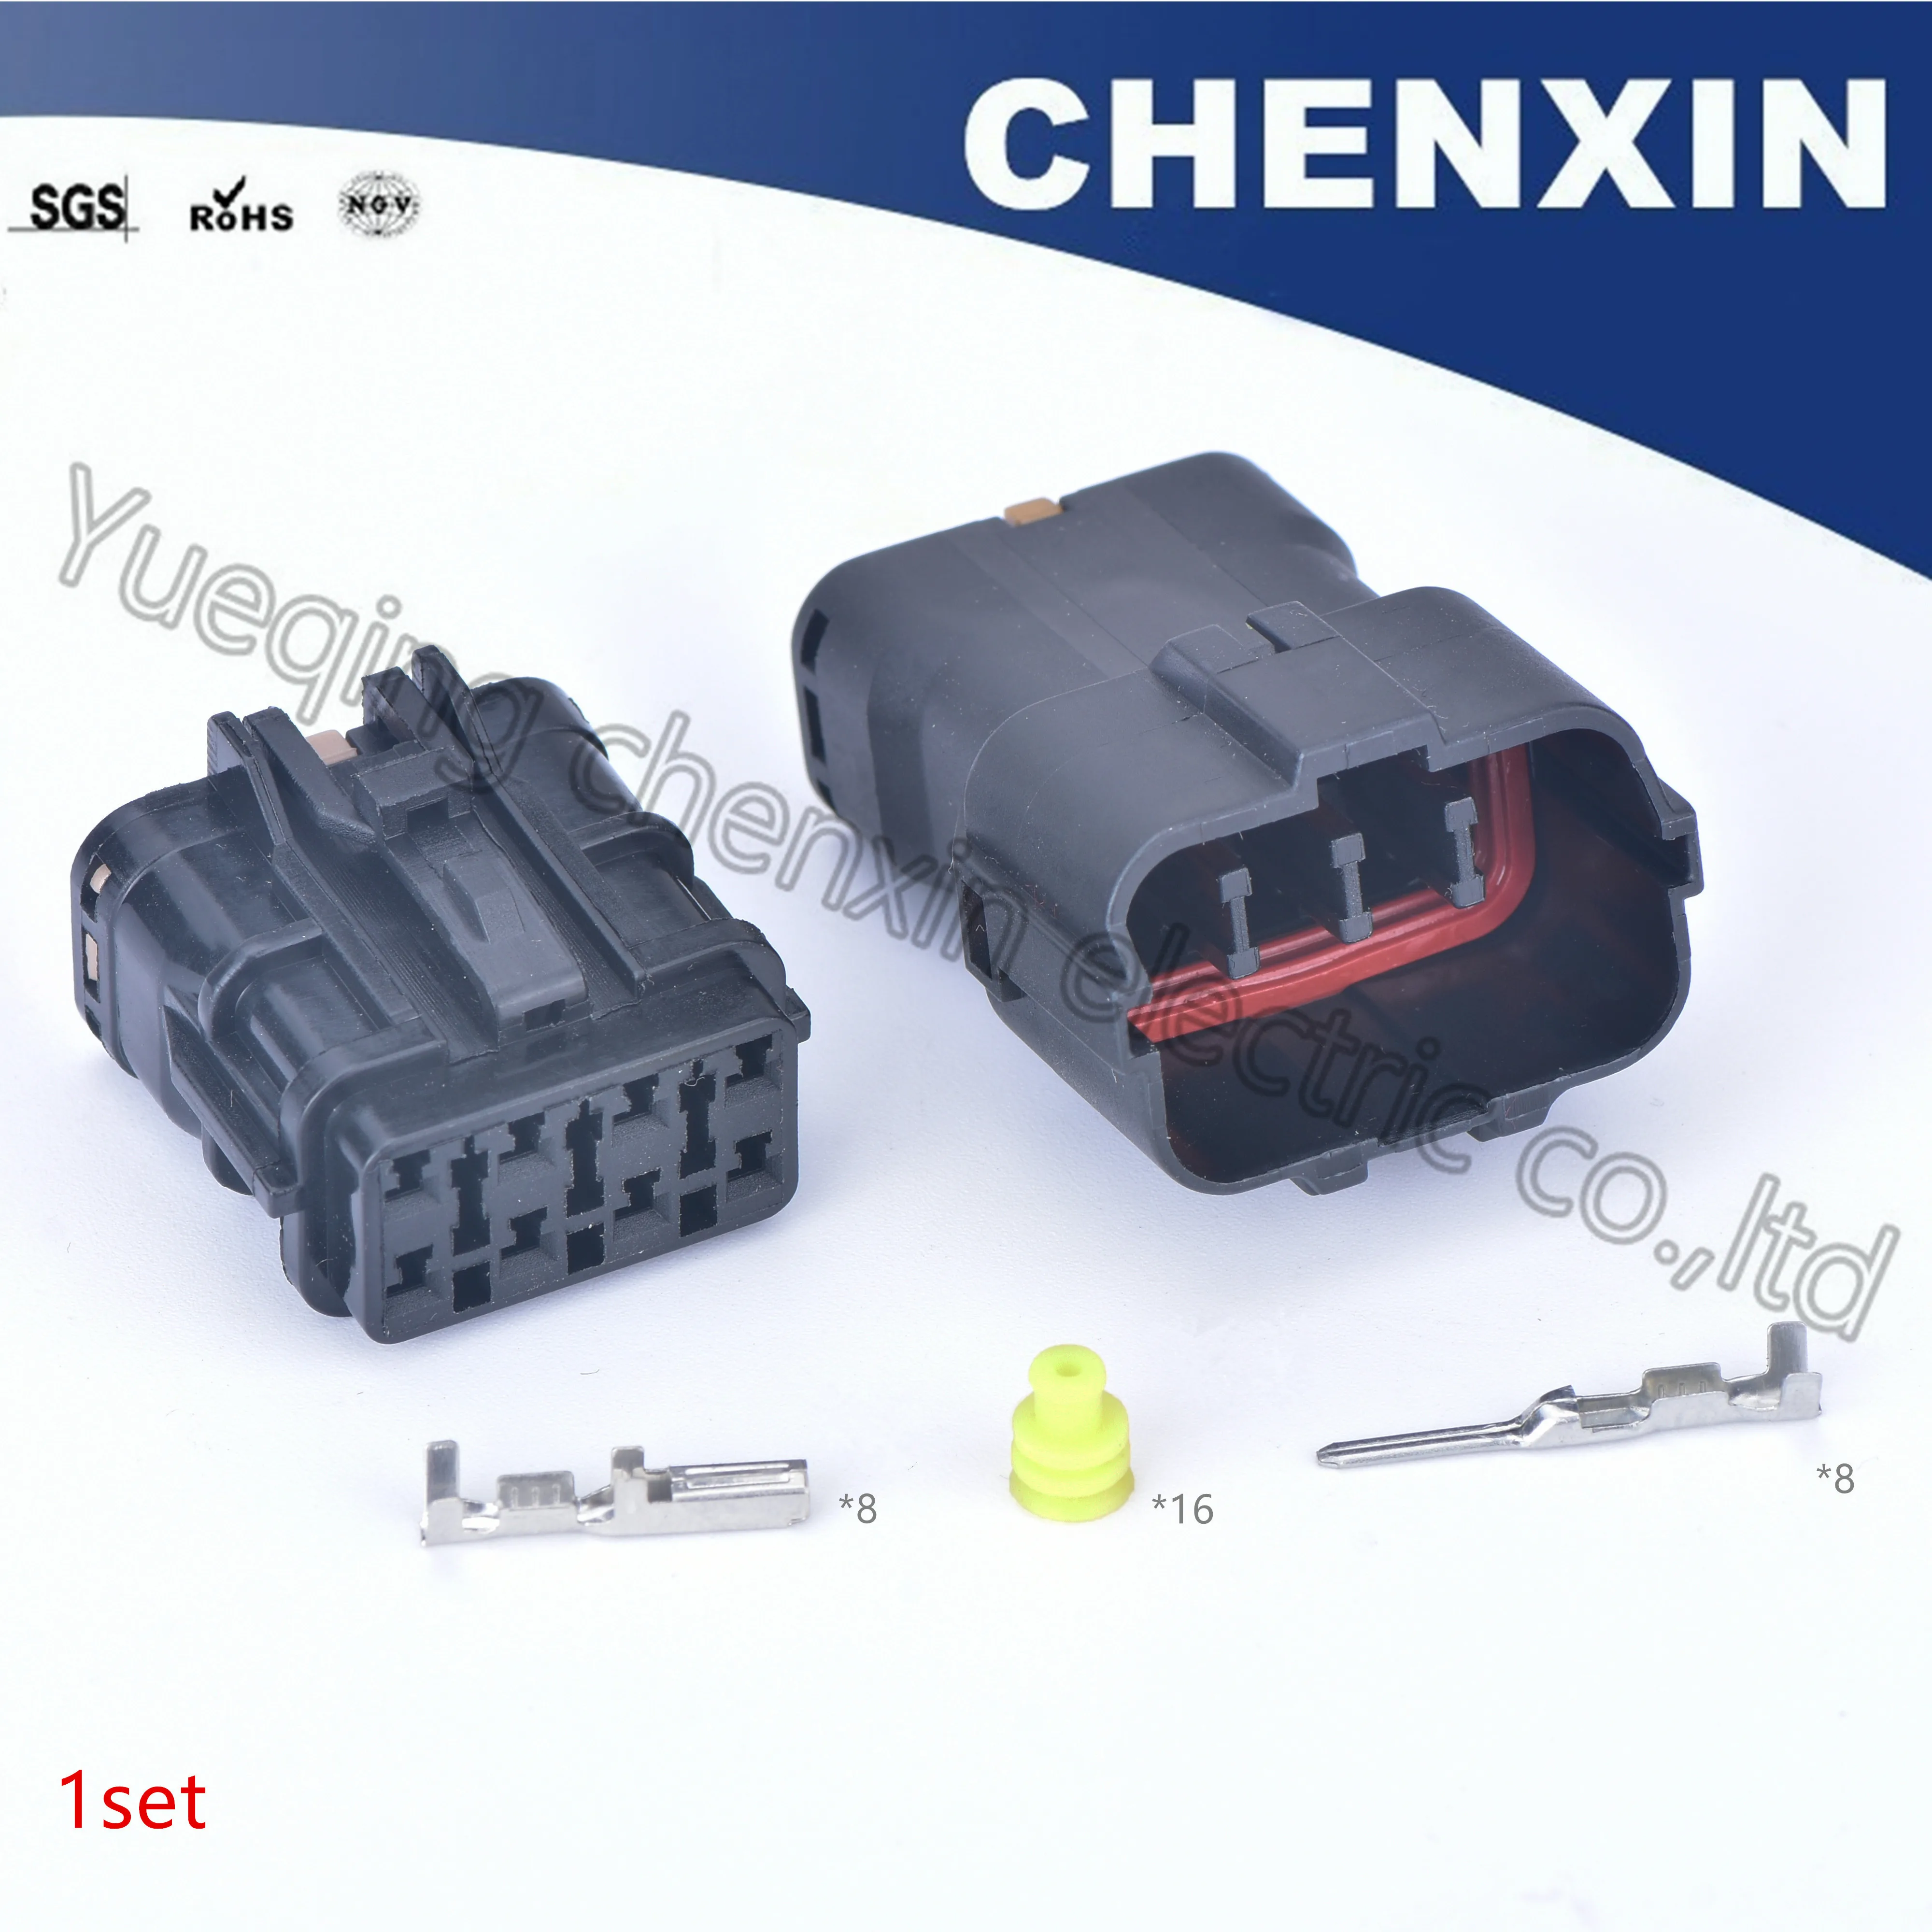 

Black 8 pin car waterproof auto connector plug 1.8 female male electrical wiring harness connector 7123-7484-40 7222-7484-40